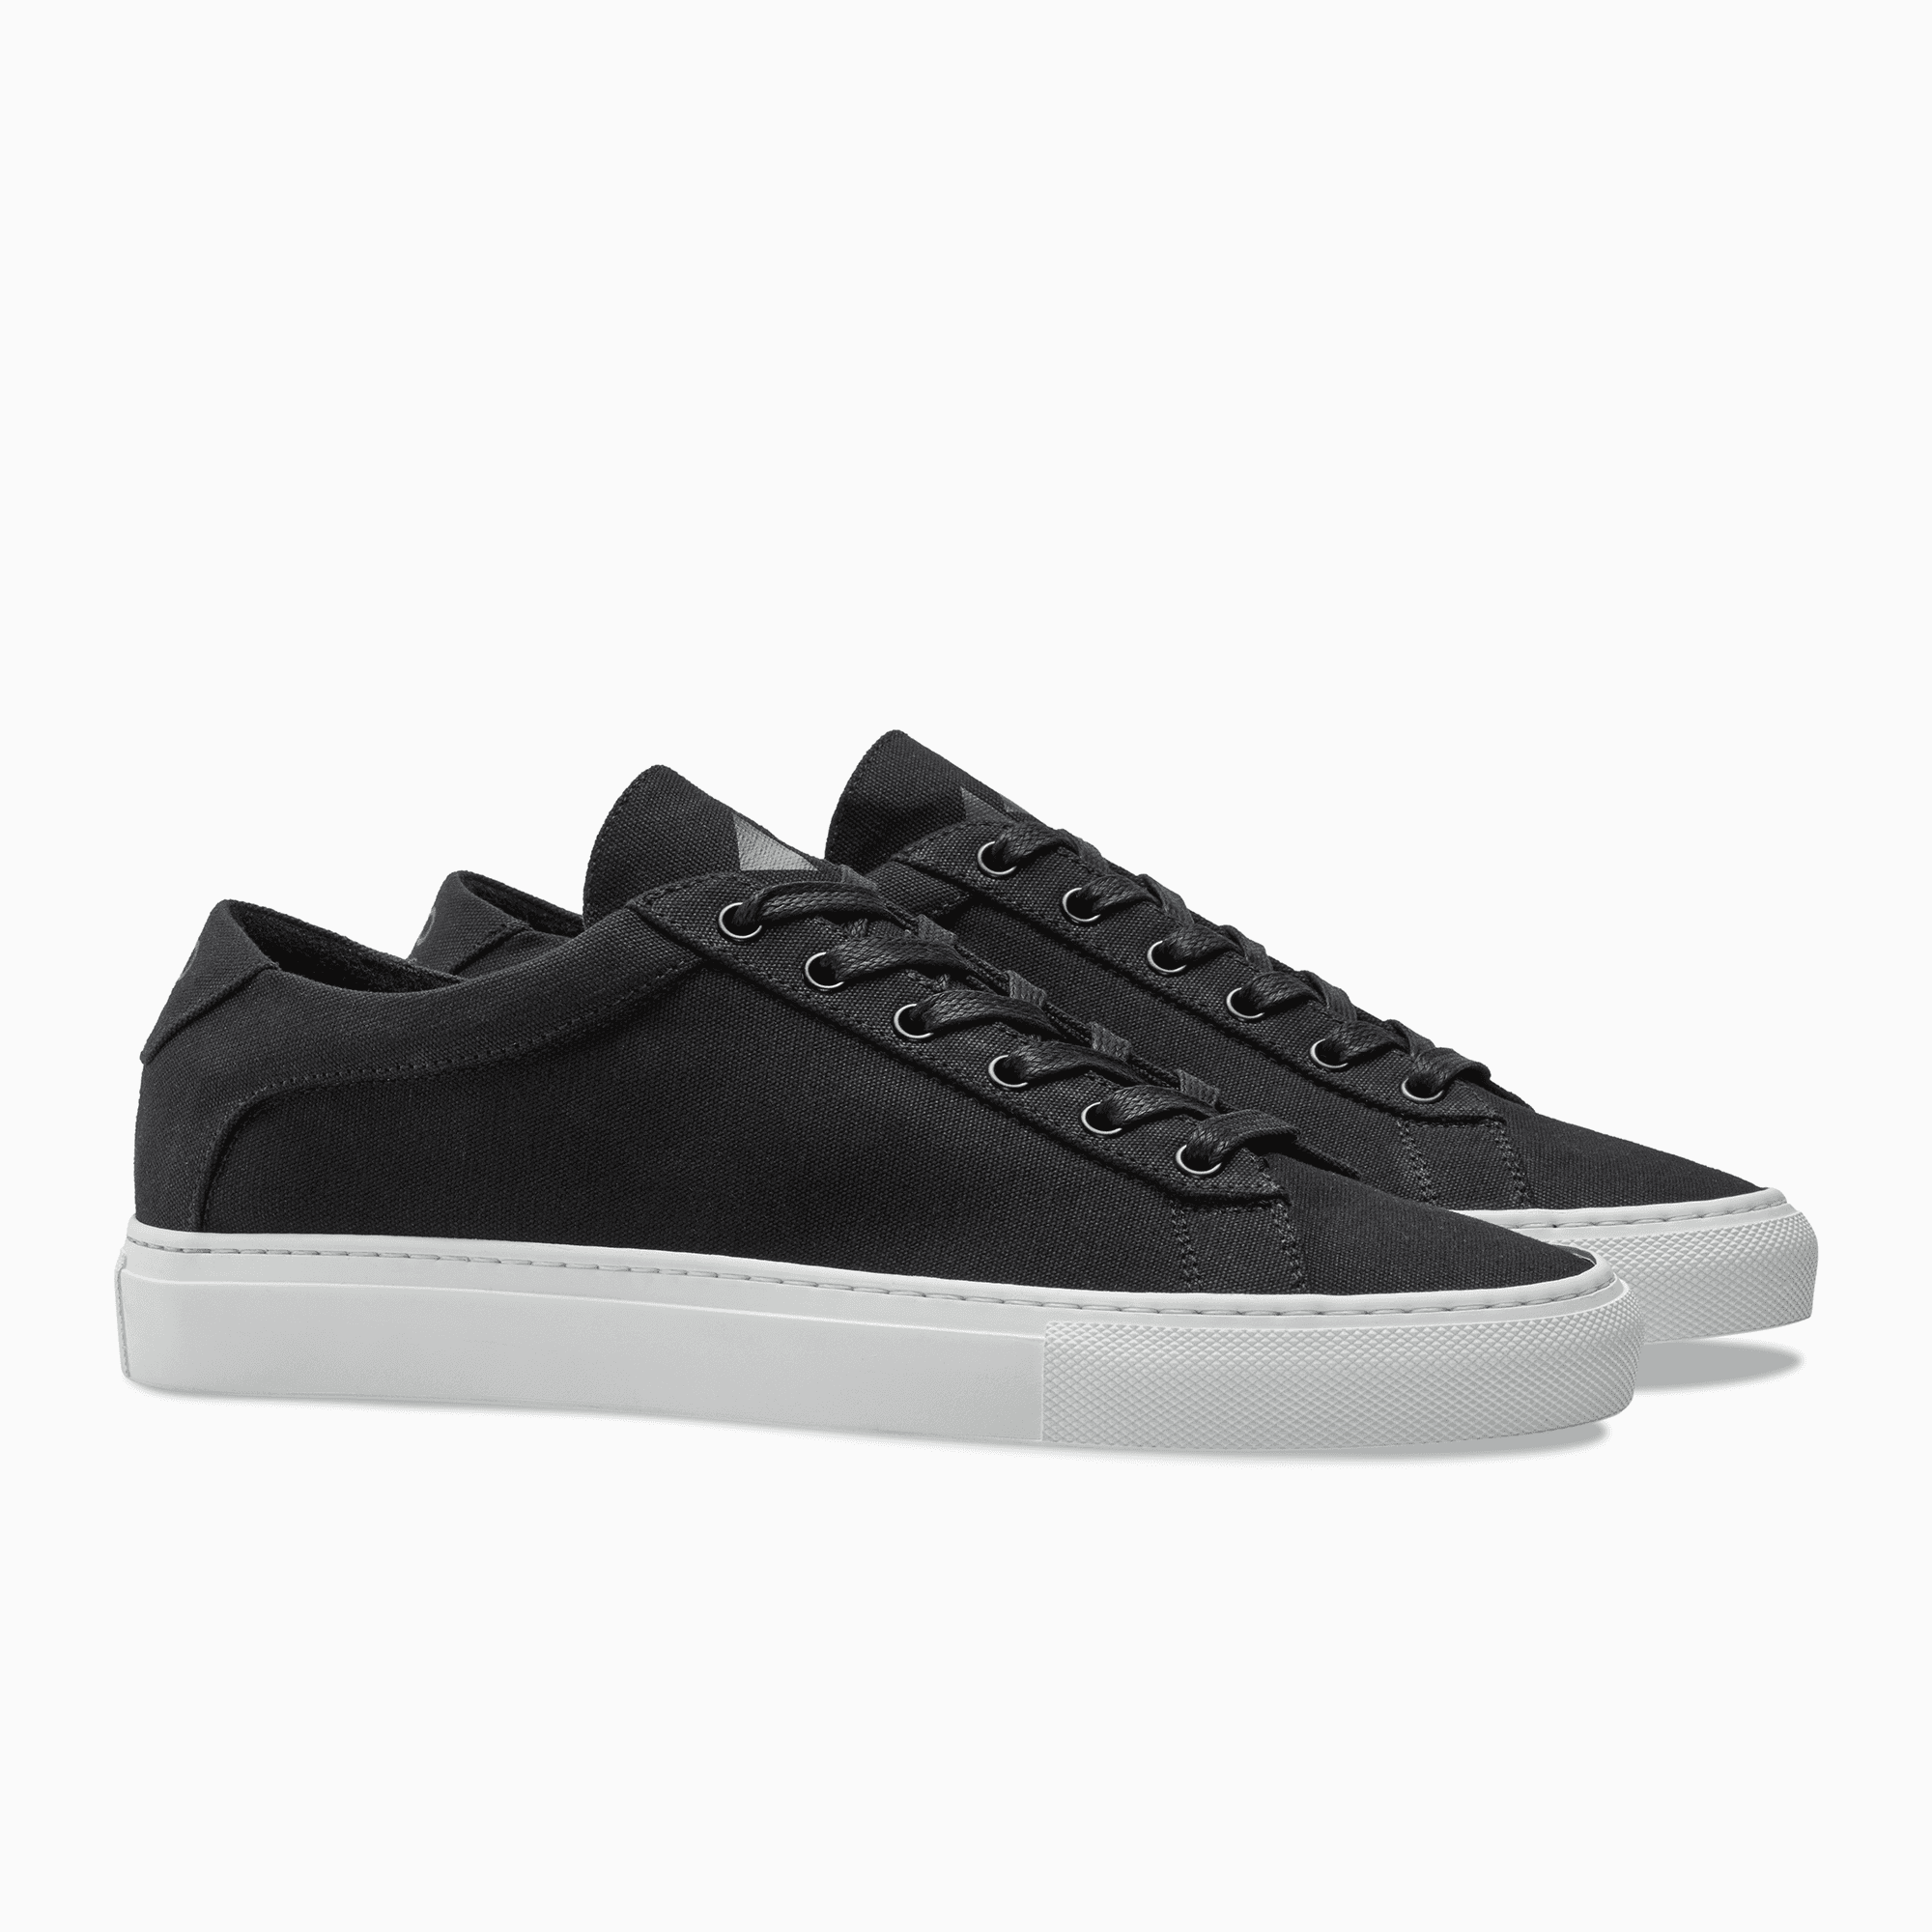 Black Canvas Low Top Sneaker white sole  Womens Koio